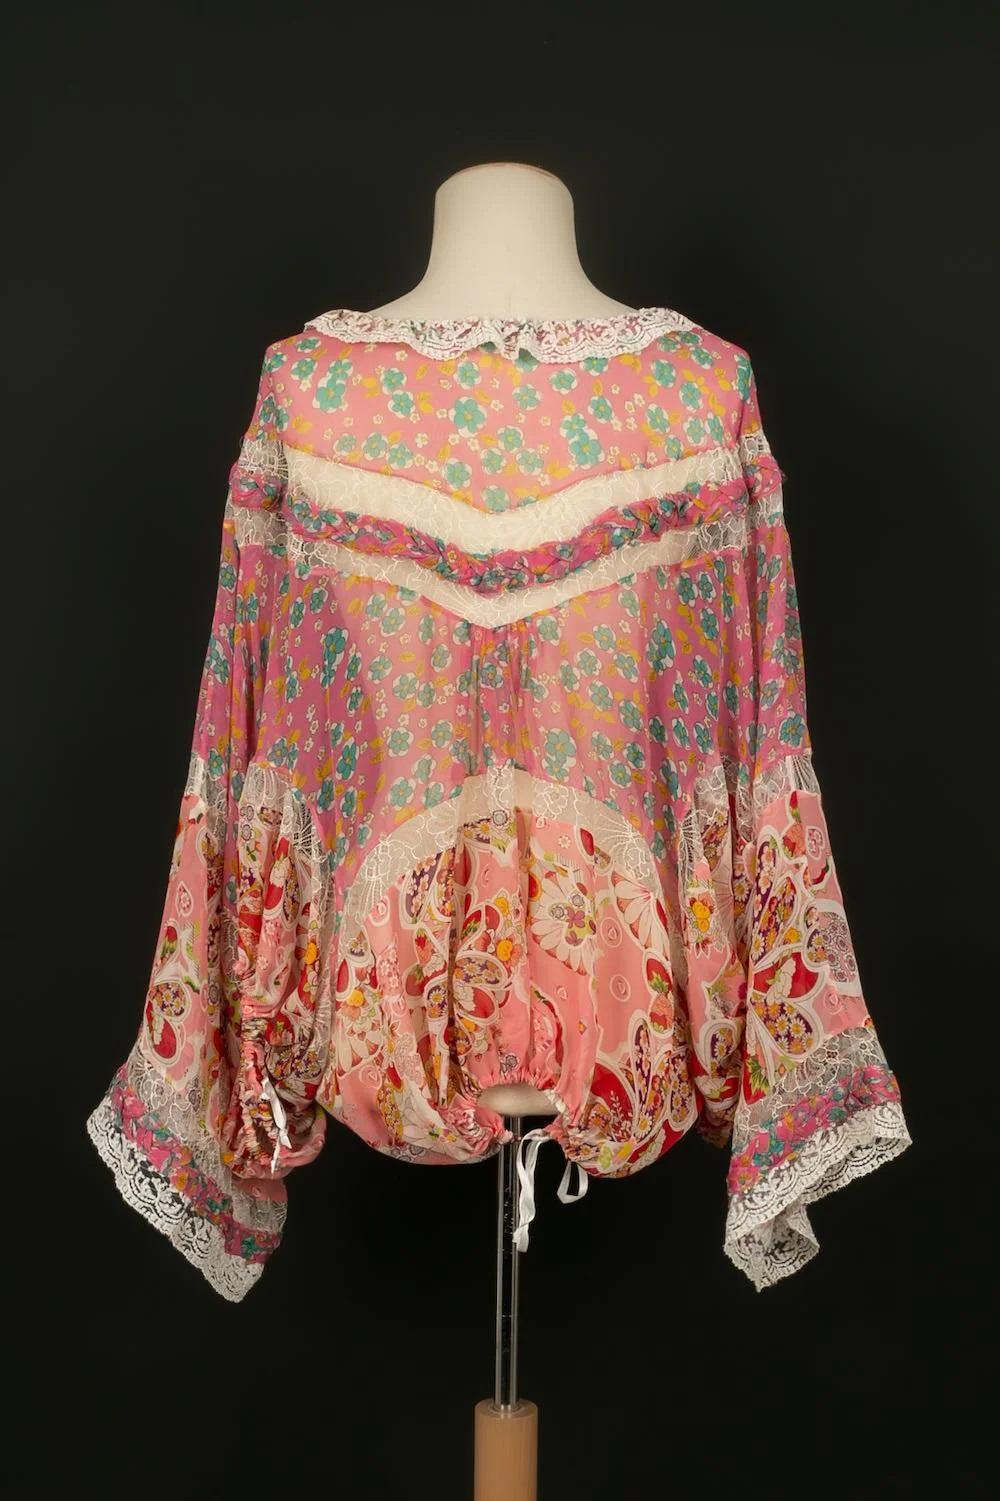 Galliano Pink Top in Chiffon and Lace in Shades of Pink 1